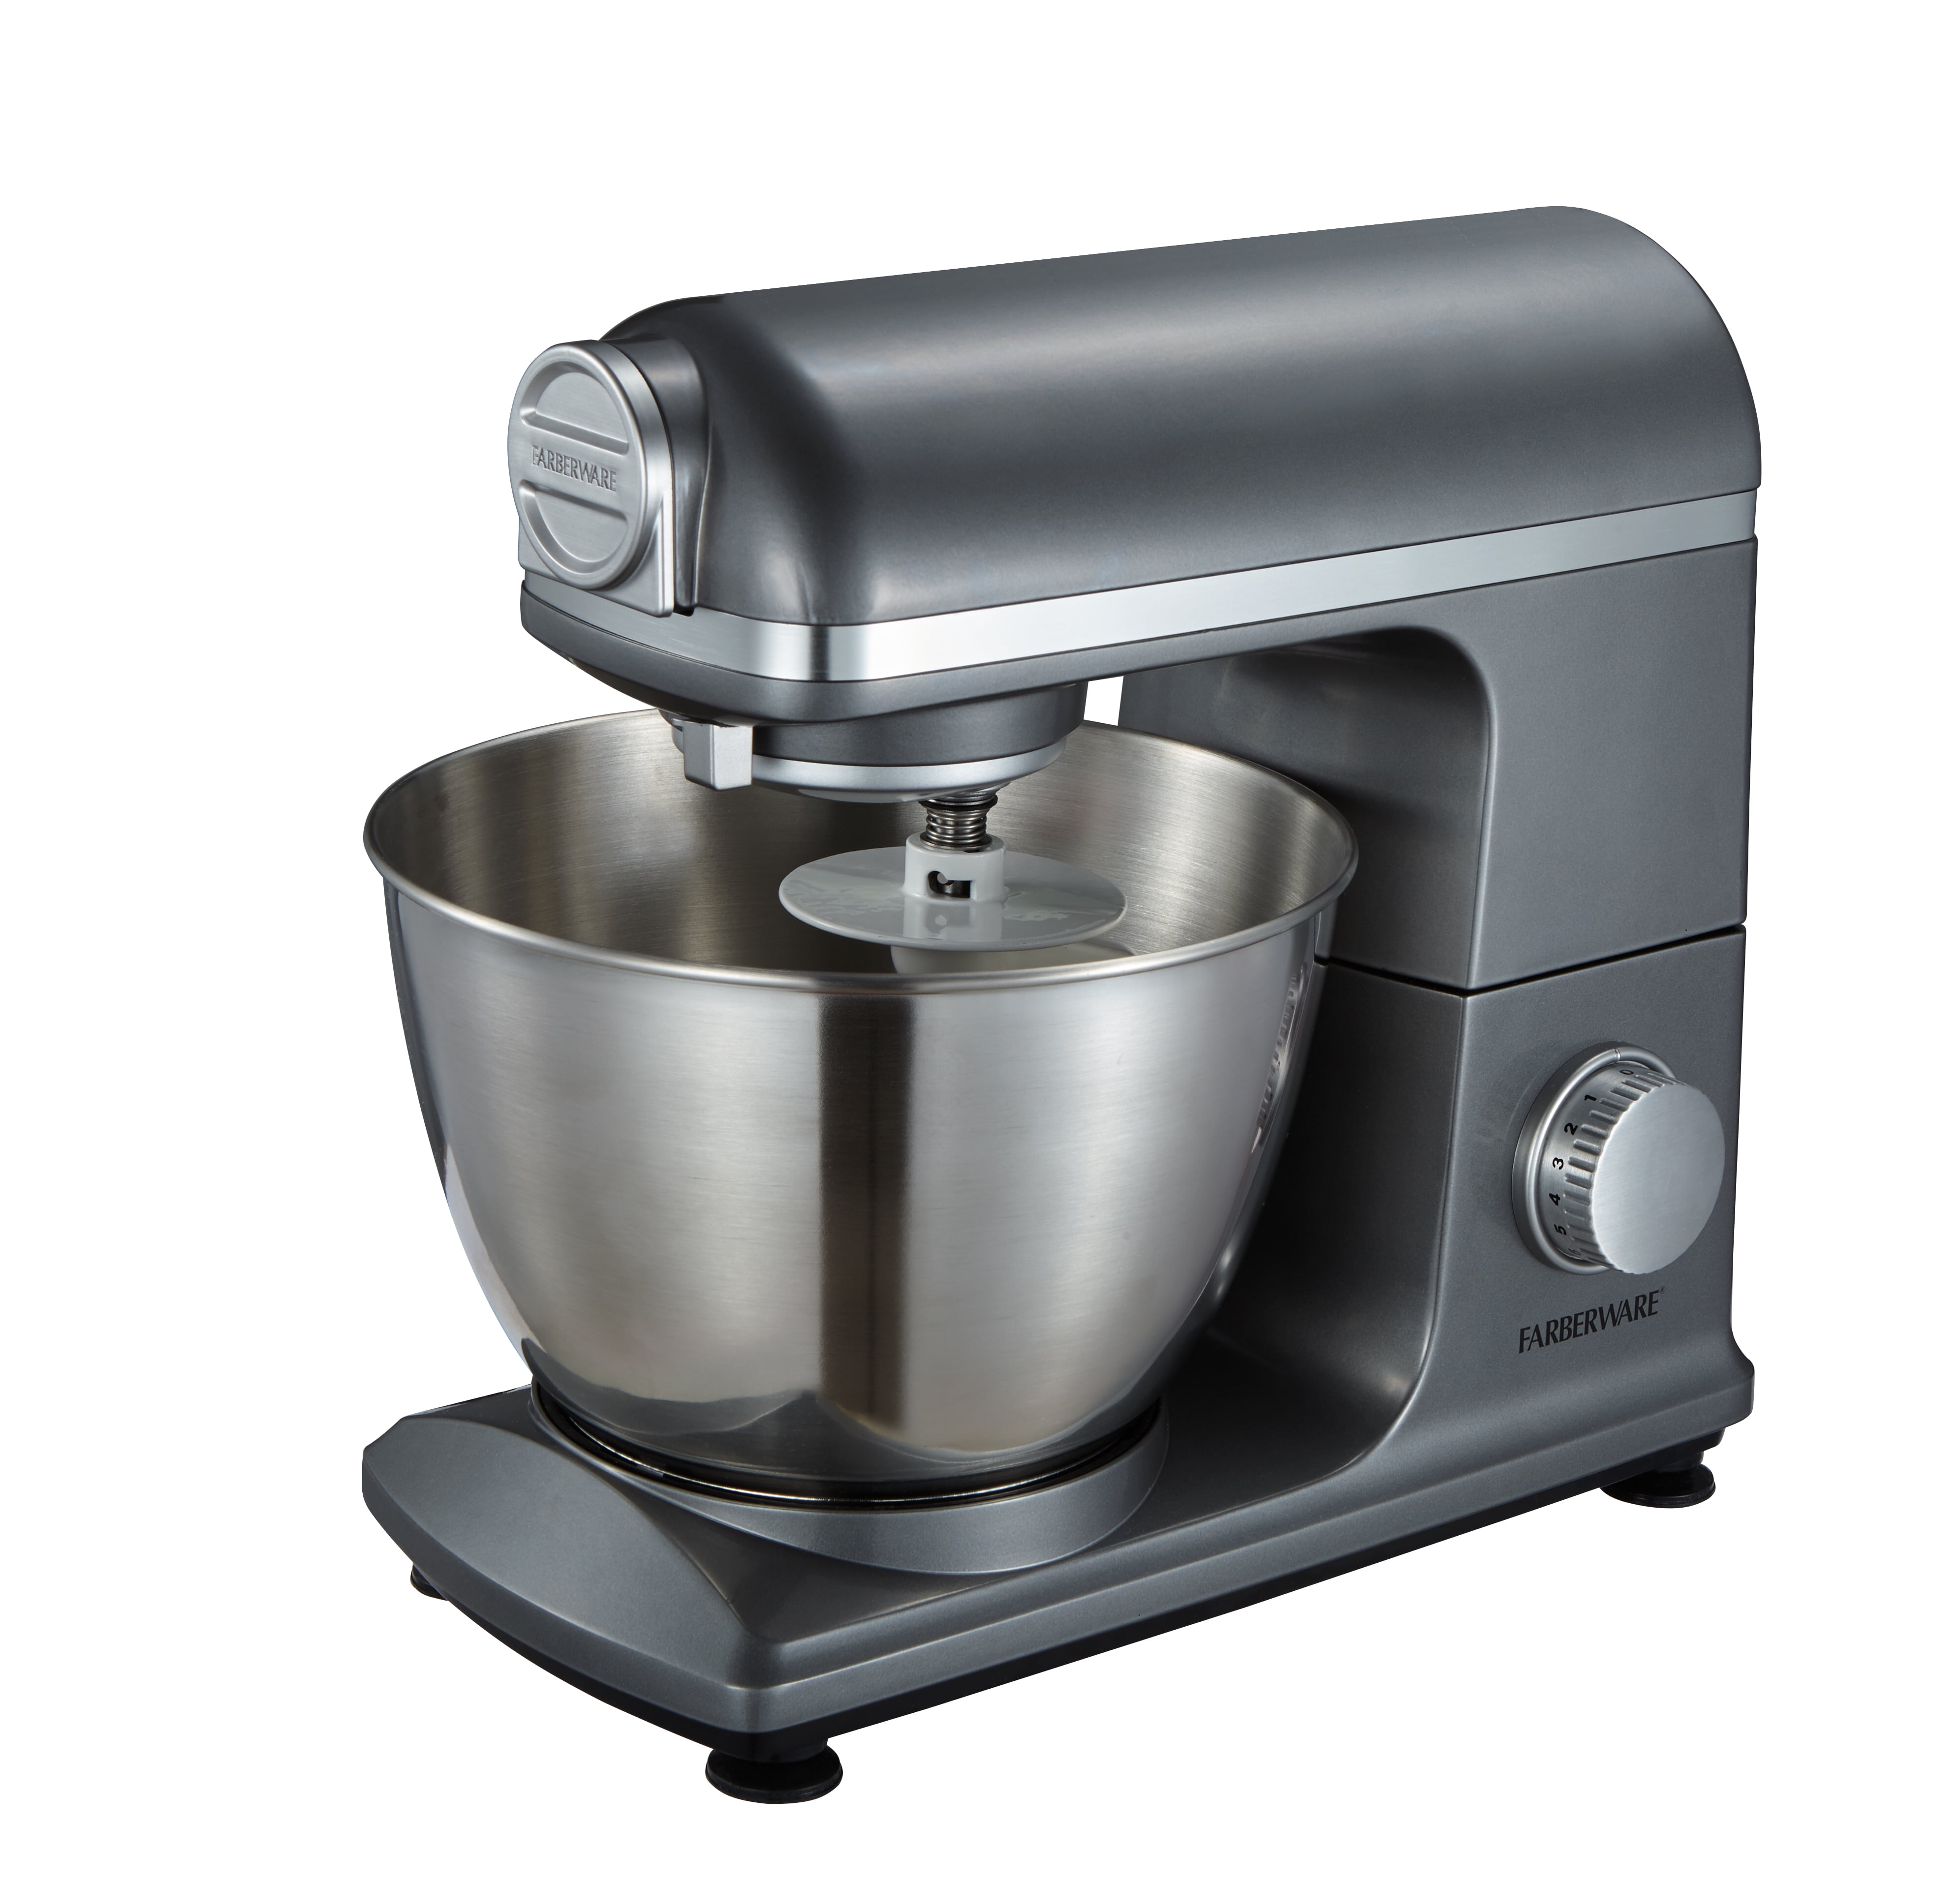 Farberware Stand Mixer Review 